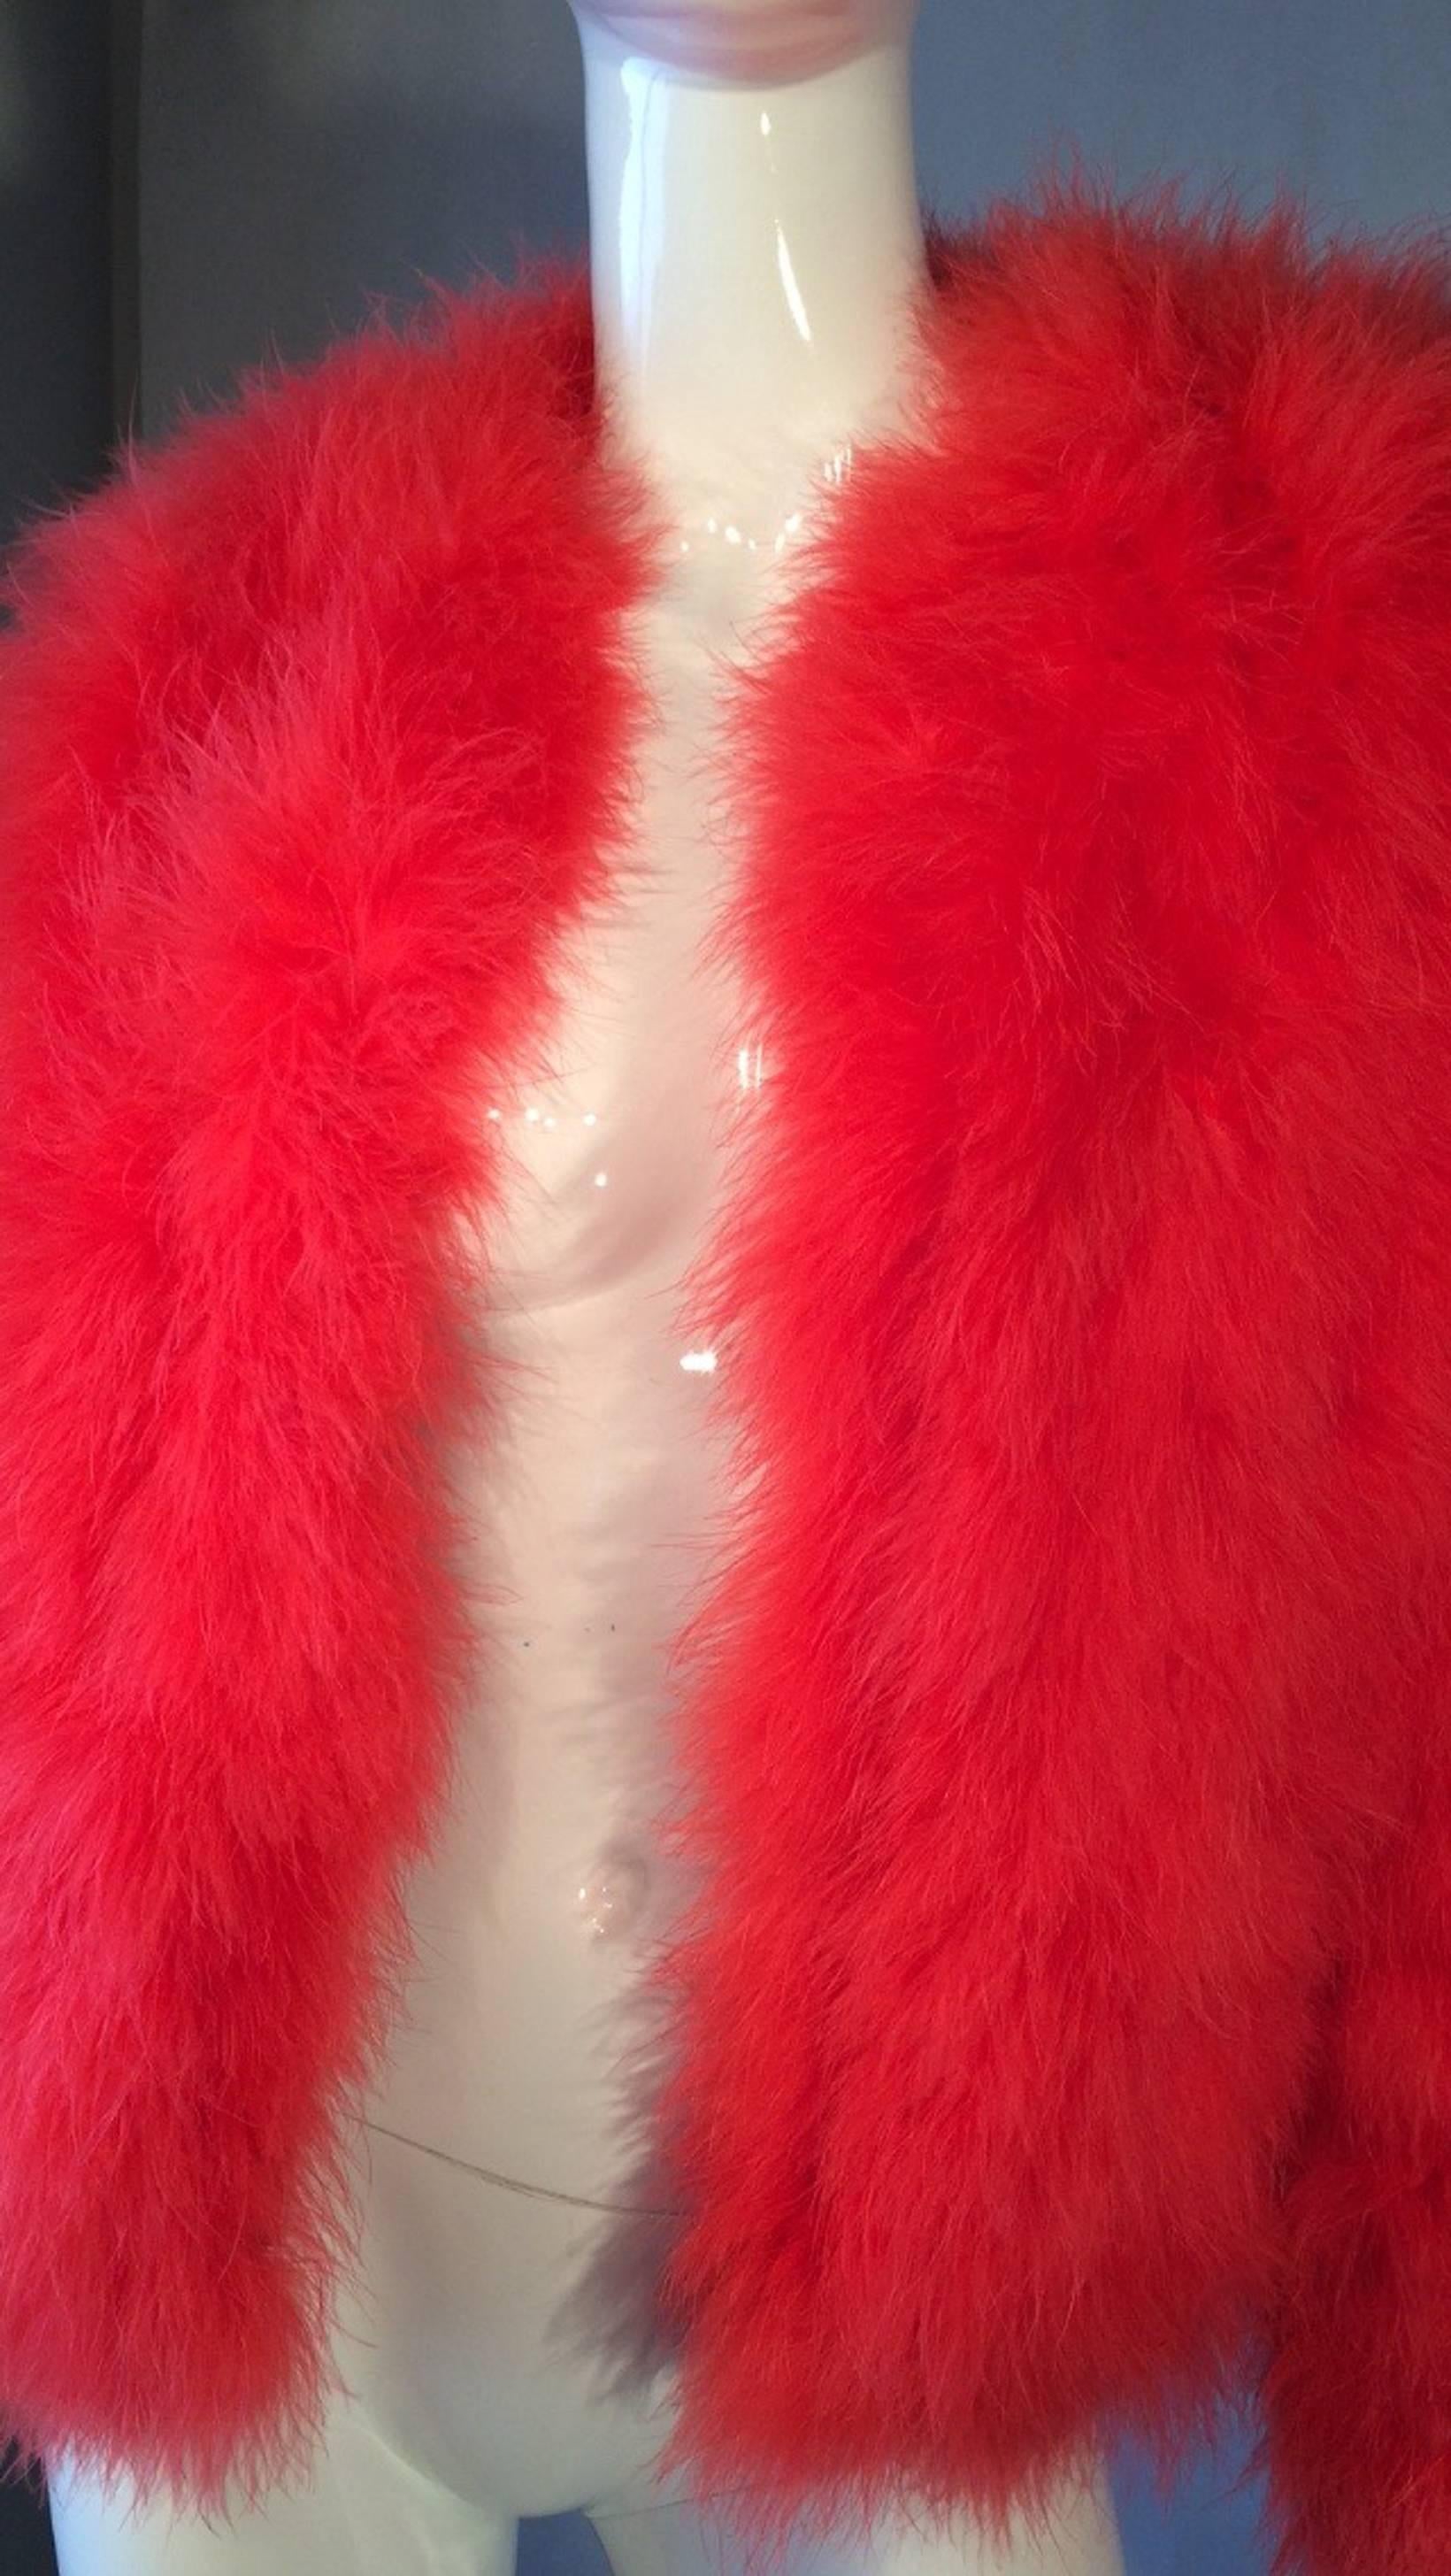 A fine and rare vintage Donald Brooks feather jacket. Authentic persimmon dyed marabou feather item fully lined in a pop art printed white and black jersey knit. Item features a open front (no closures). Excellent with no issues.